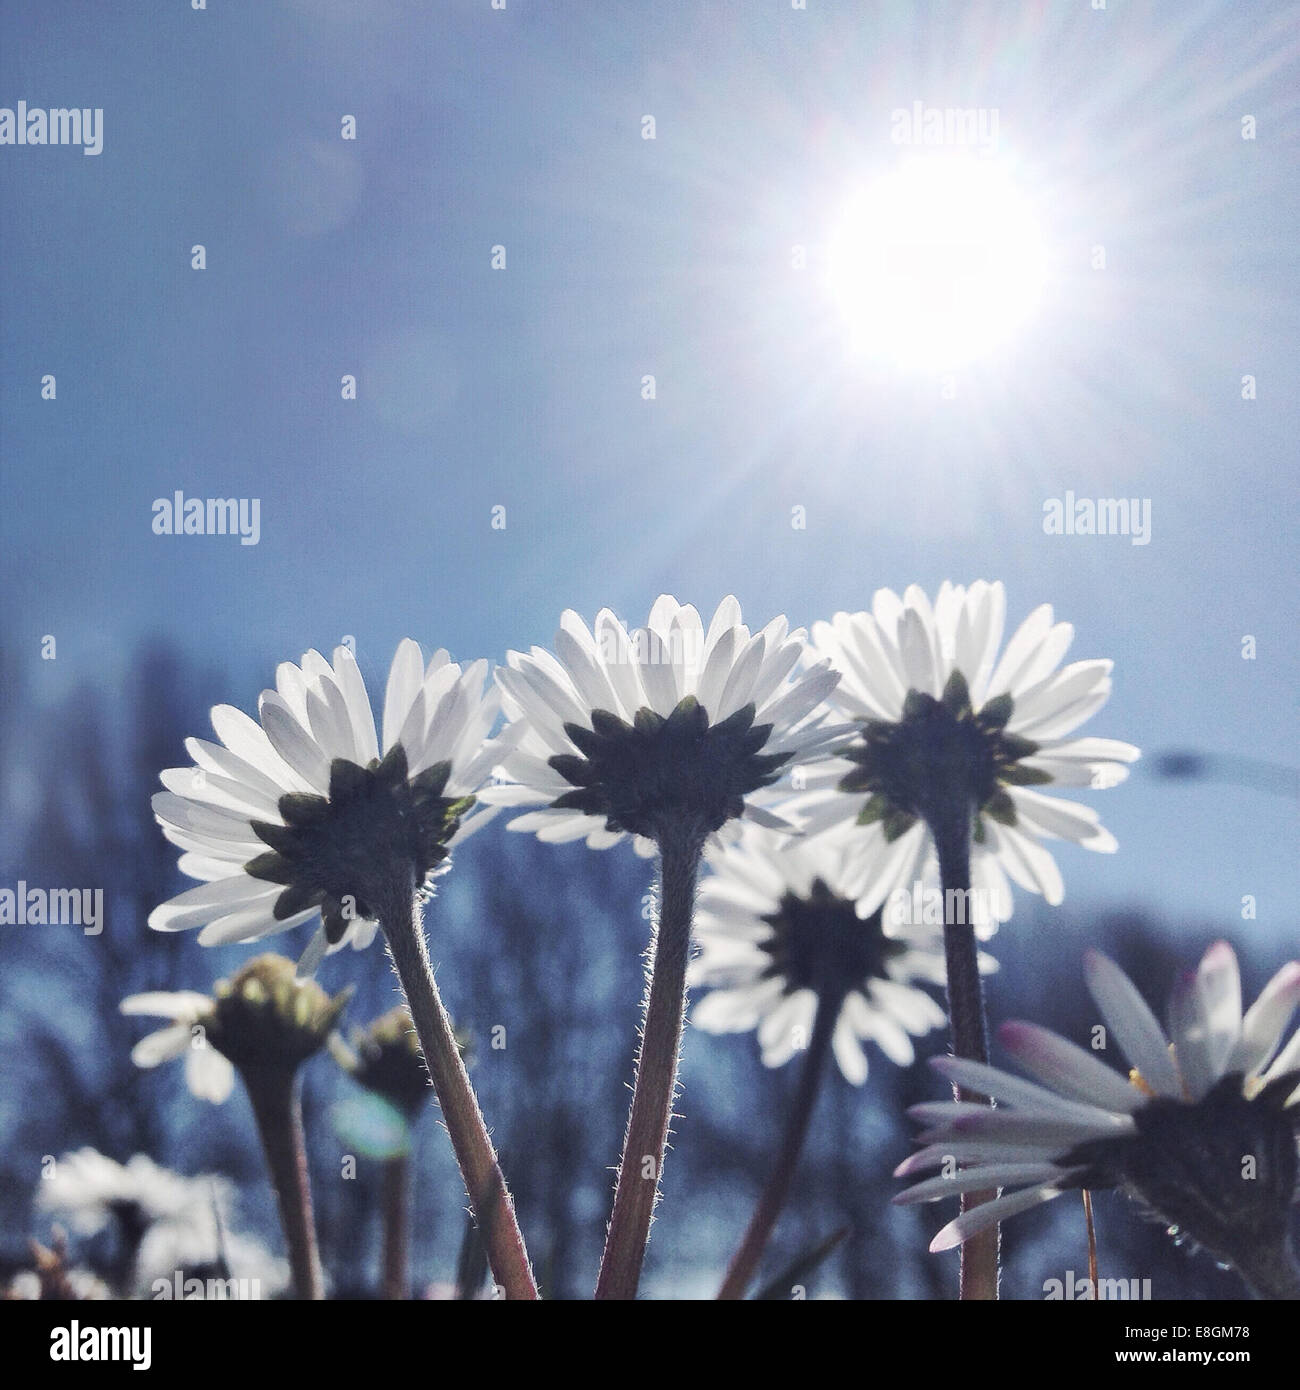 Low angle view of daisies in the sun Stock Photo